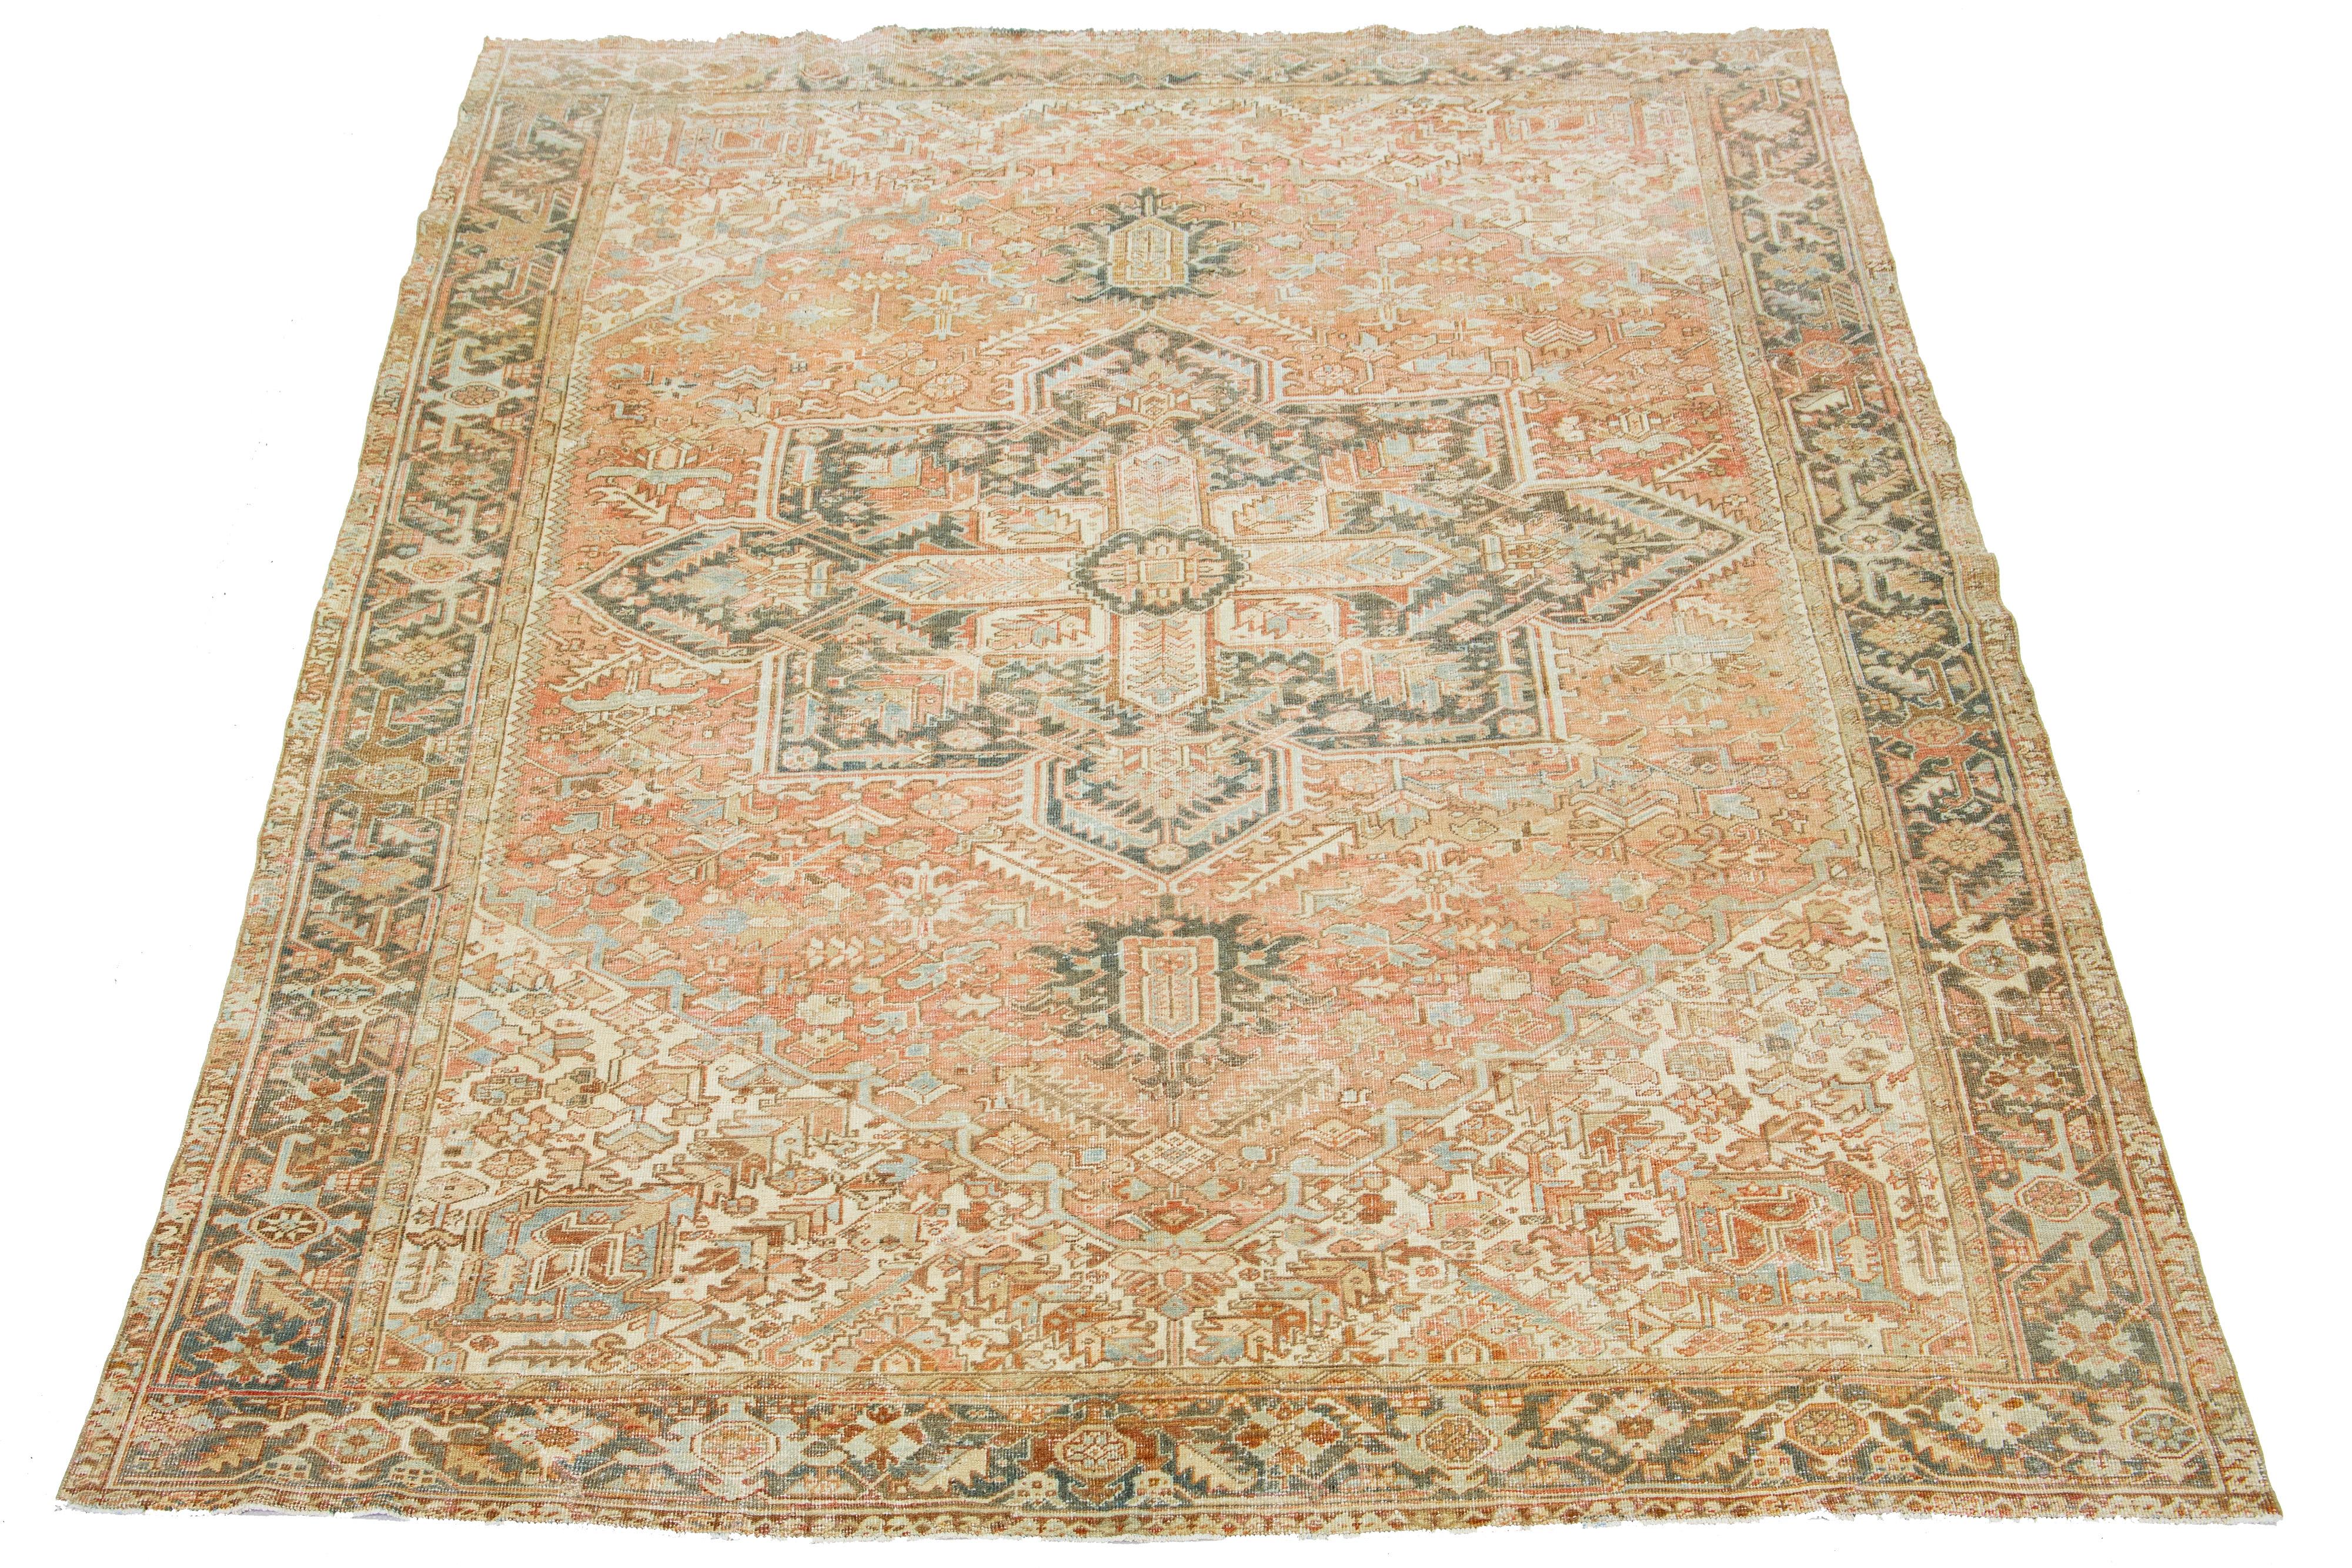 This antique Persian Heriz rug is crafted with hand-knotted wool. The rust-colored field features a captivating medallion pattern embellished with shades of blue, beige, and gray.

This rug measures 9'7